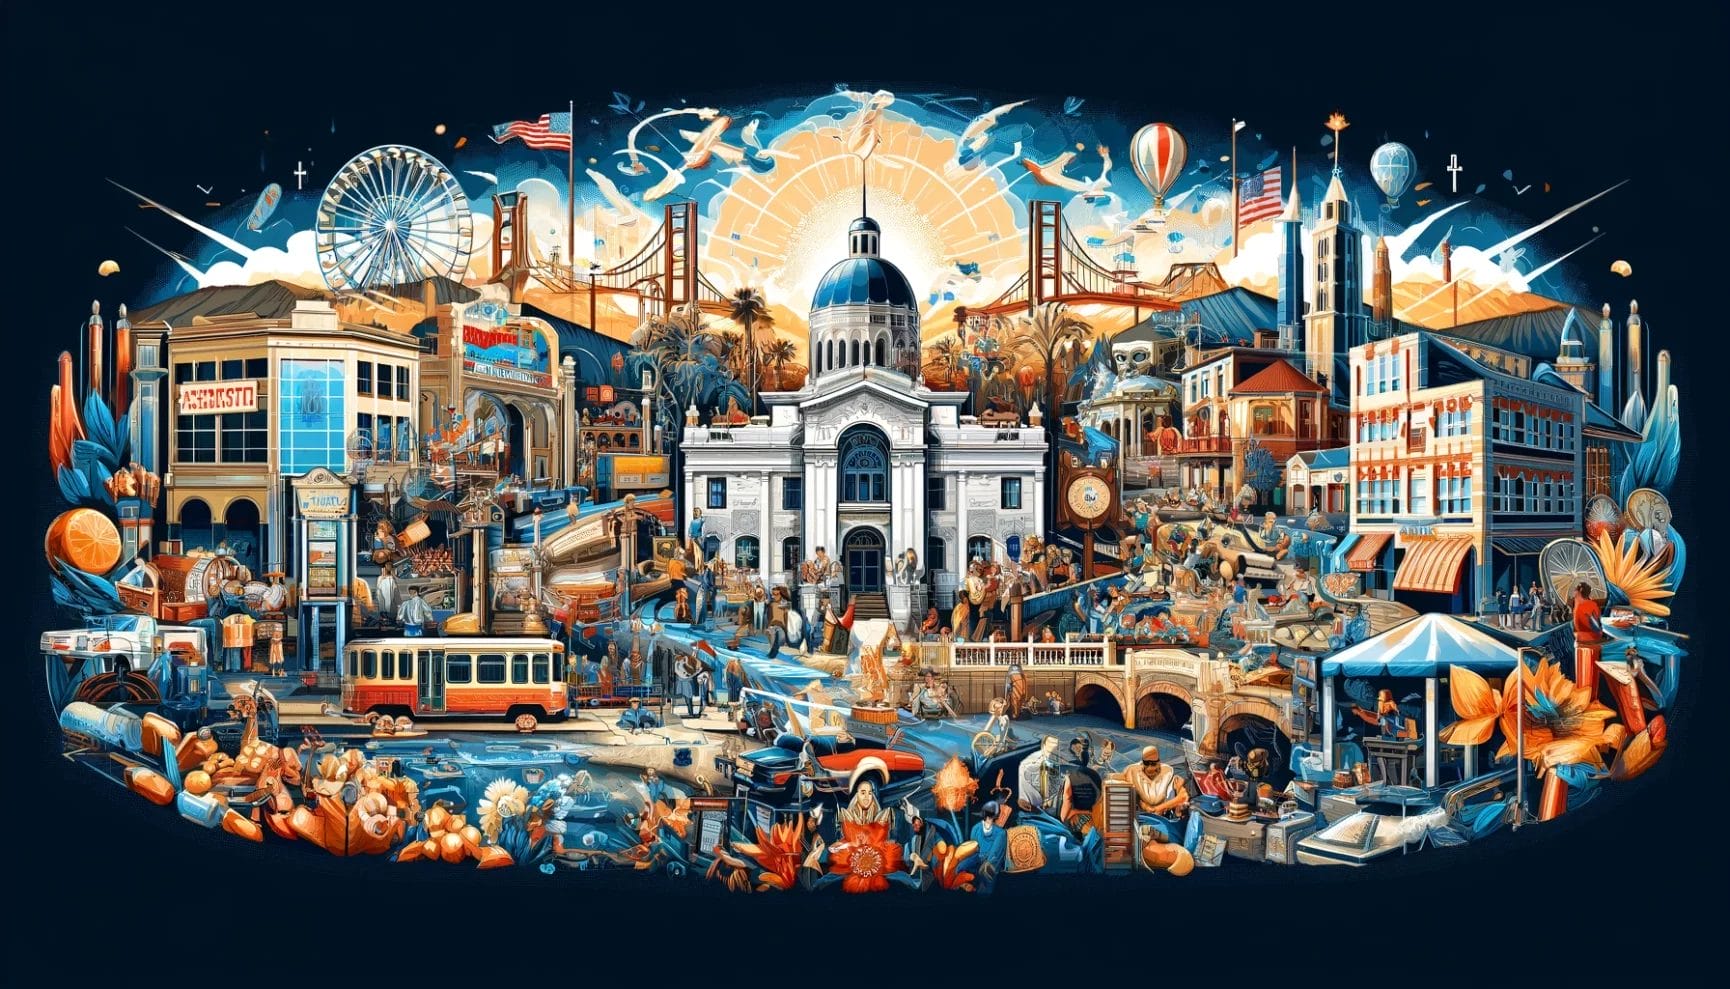 A vibrant and detailed illustration featuring a central building with various cultural, historical, and modern elements of city life and entertainment surrounding it.